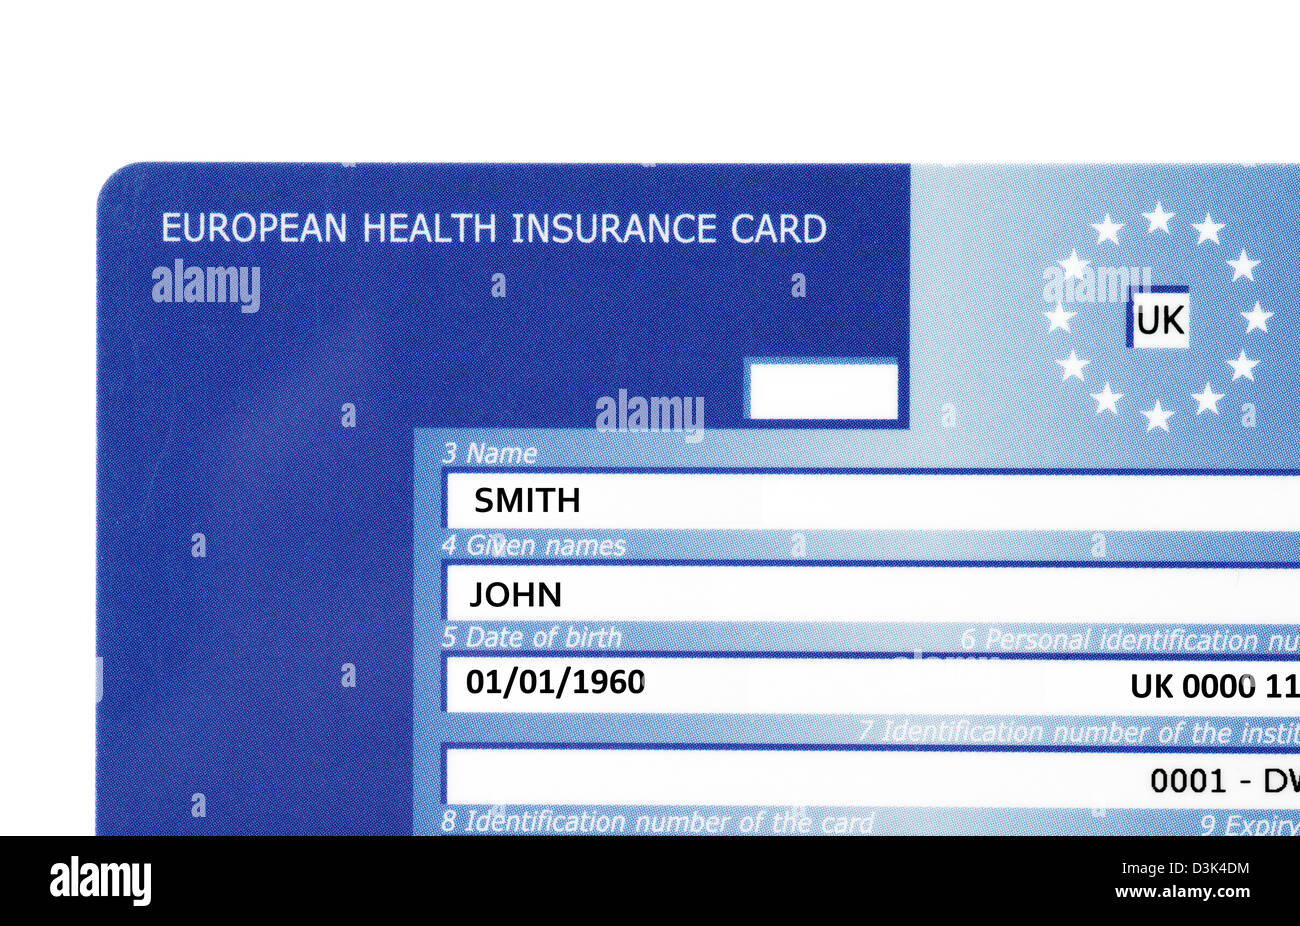 A European Health Insurance Card issued in the UK Stock Photo